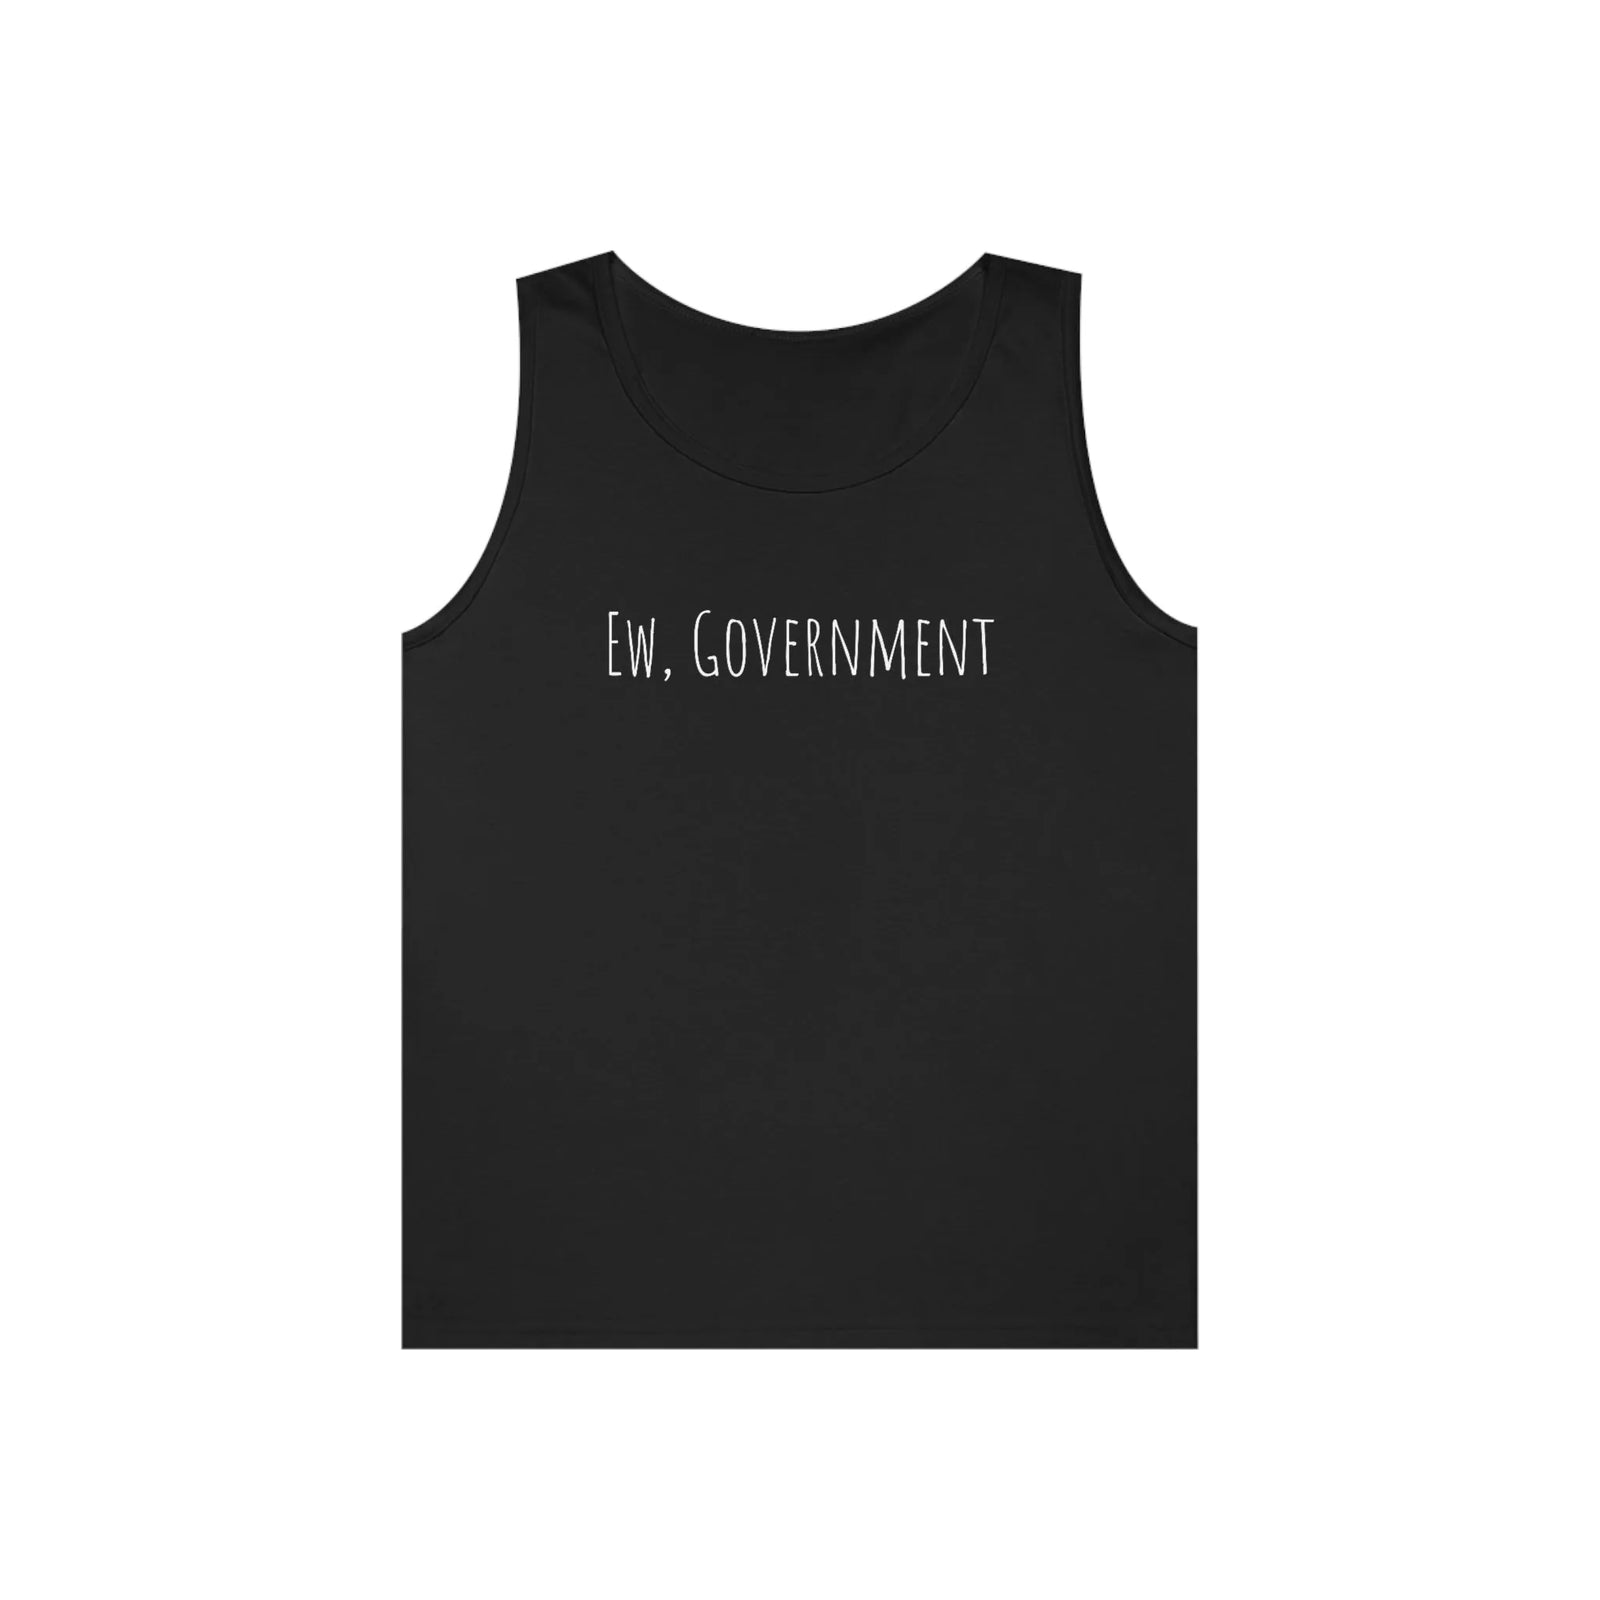 Ew, Government Tank Top